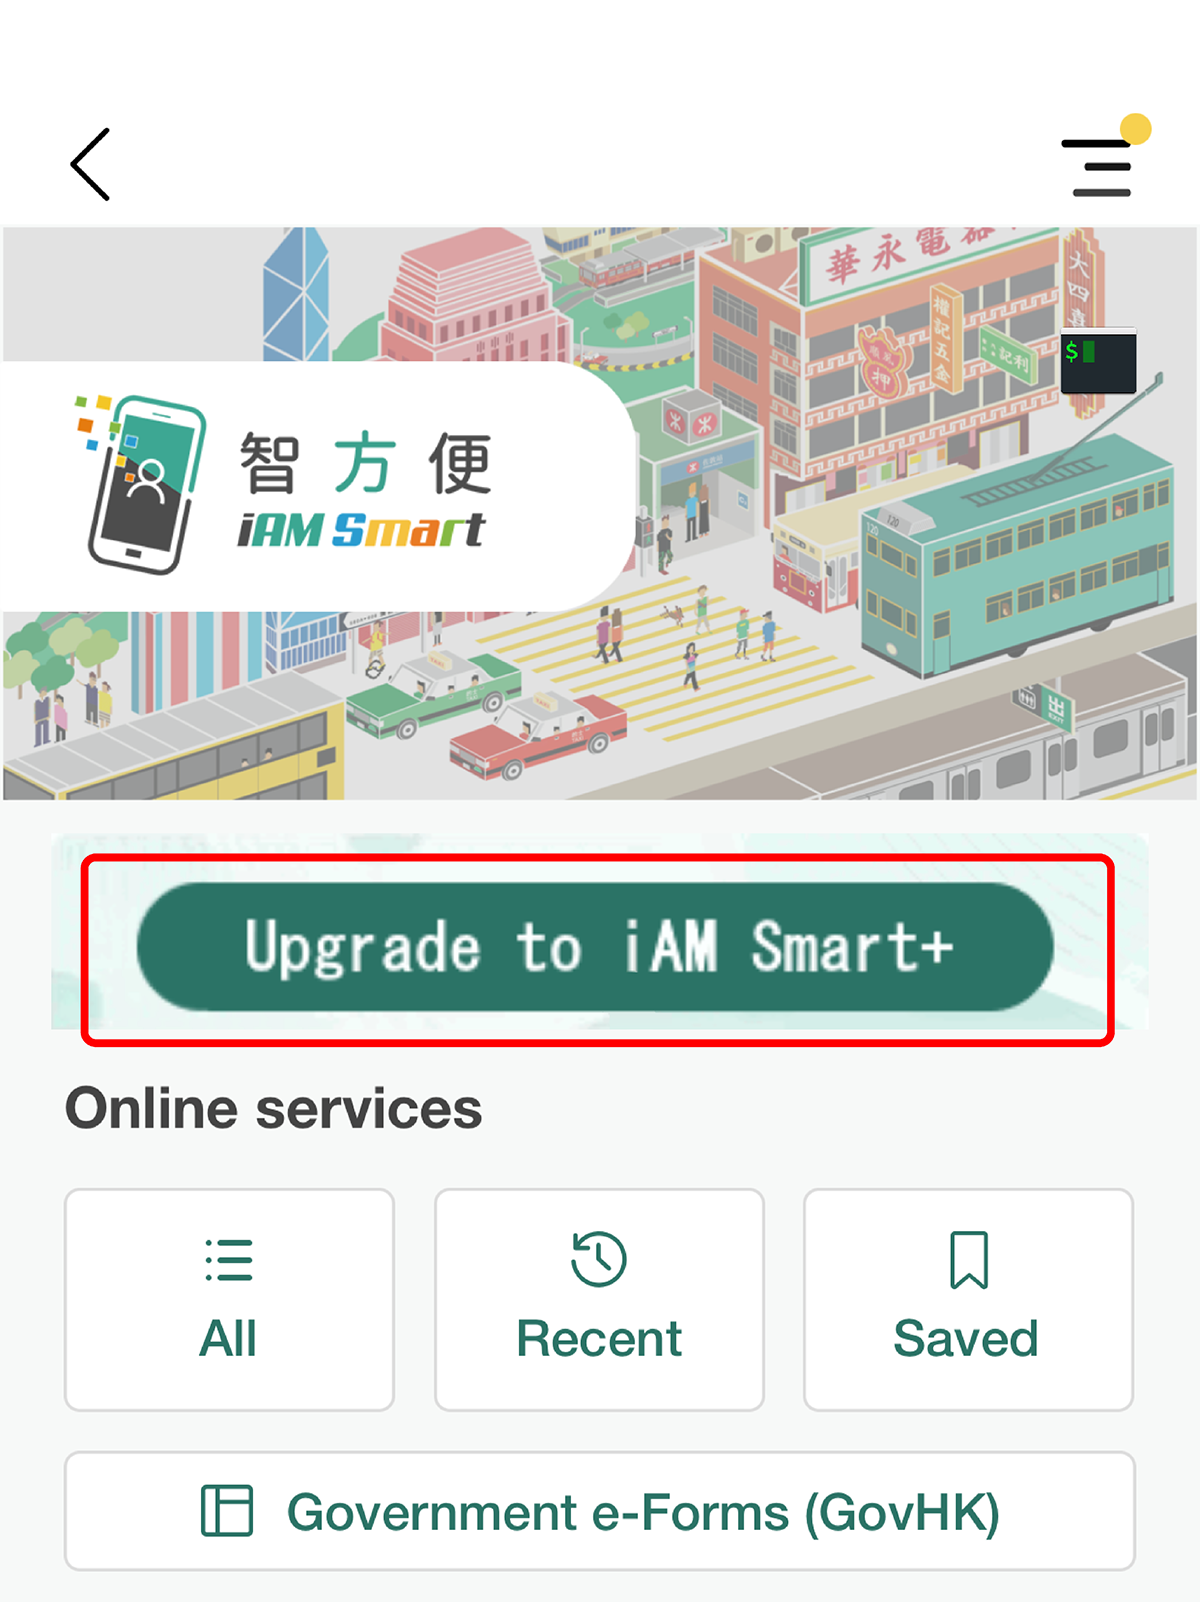 Users who are invited to upgrade to “iAM Smart+” can log in to the new version of the “iAM Smart” mobile app and click the “Upgrade to iAM Smart+” button to directly upgrade to “iAM Smart+”. Picture shows a screenshot of the “iAM Smart” mobile app.